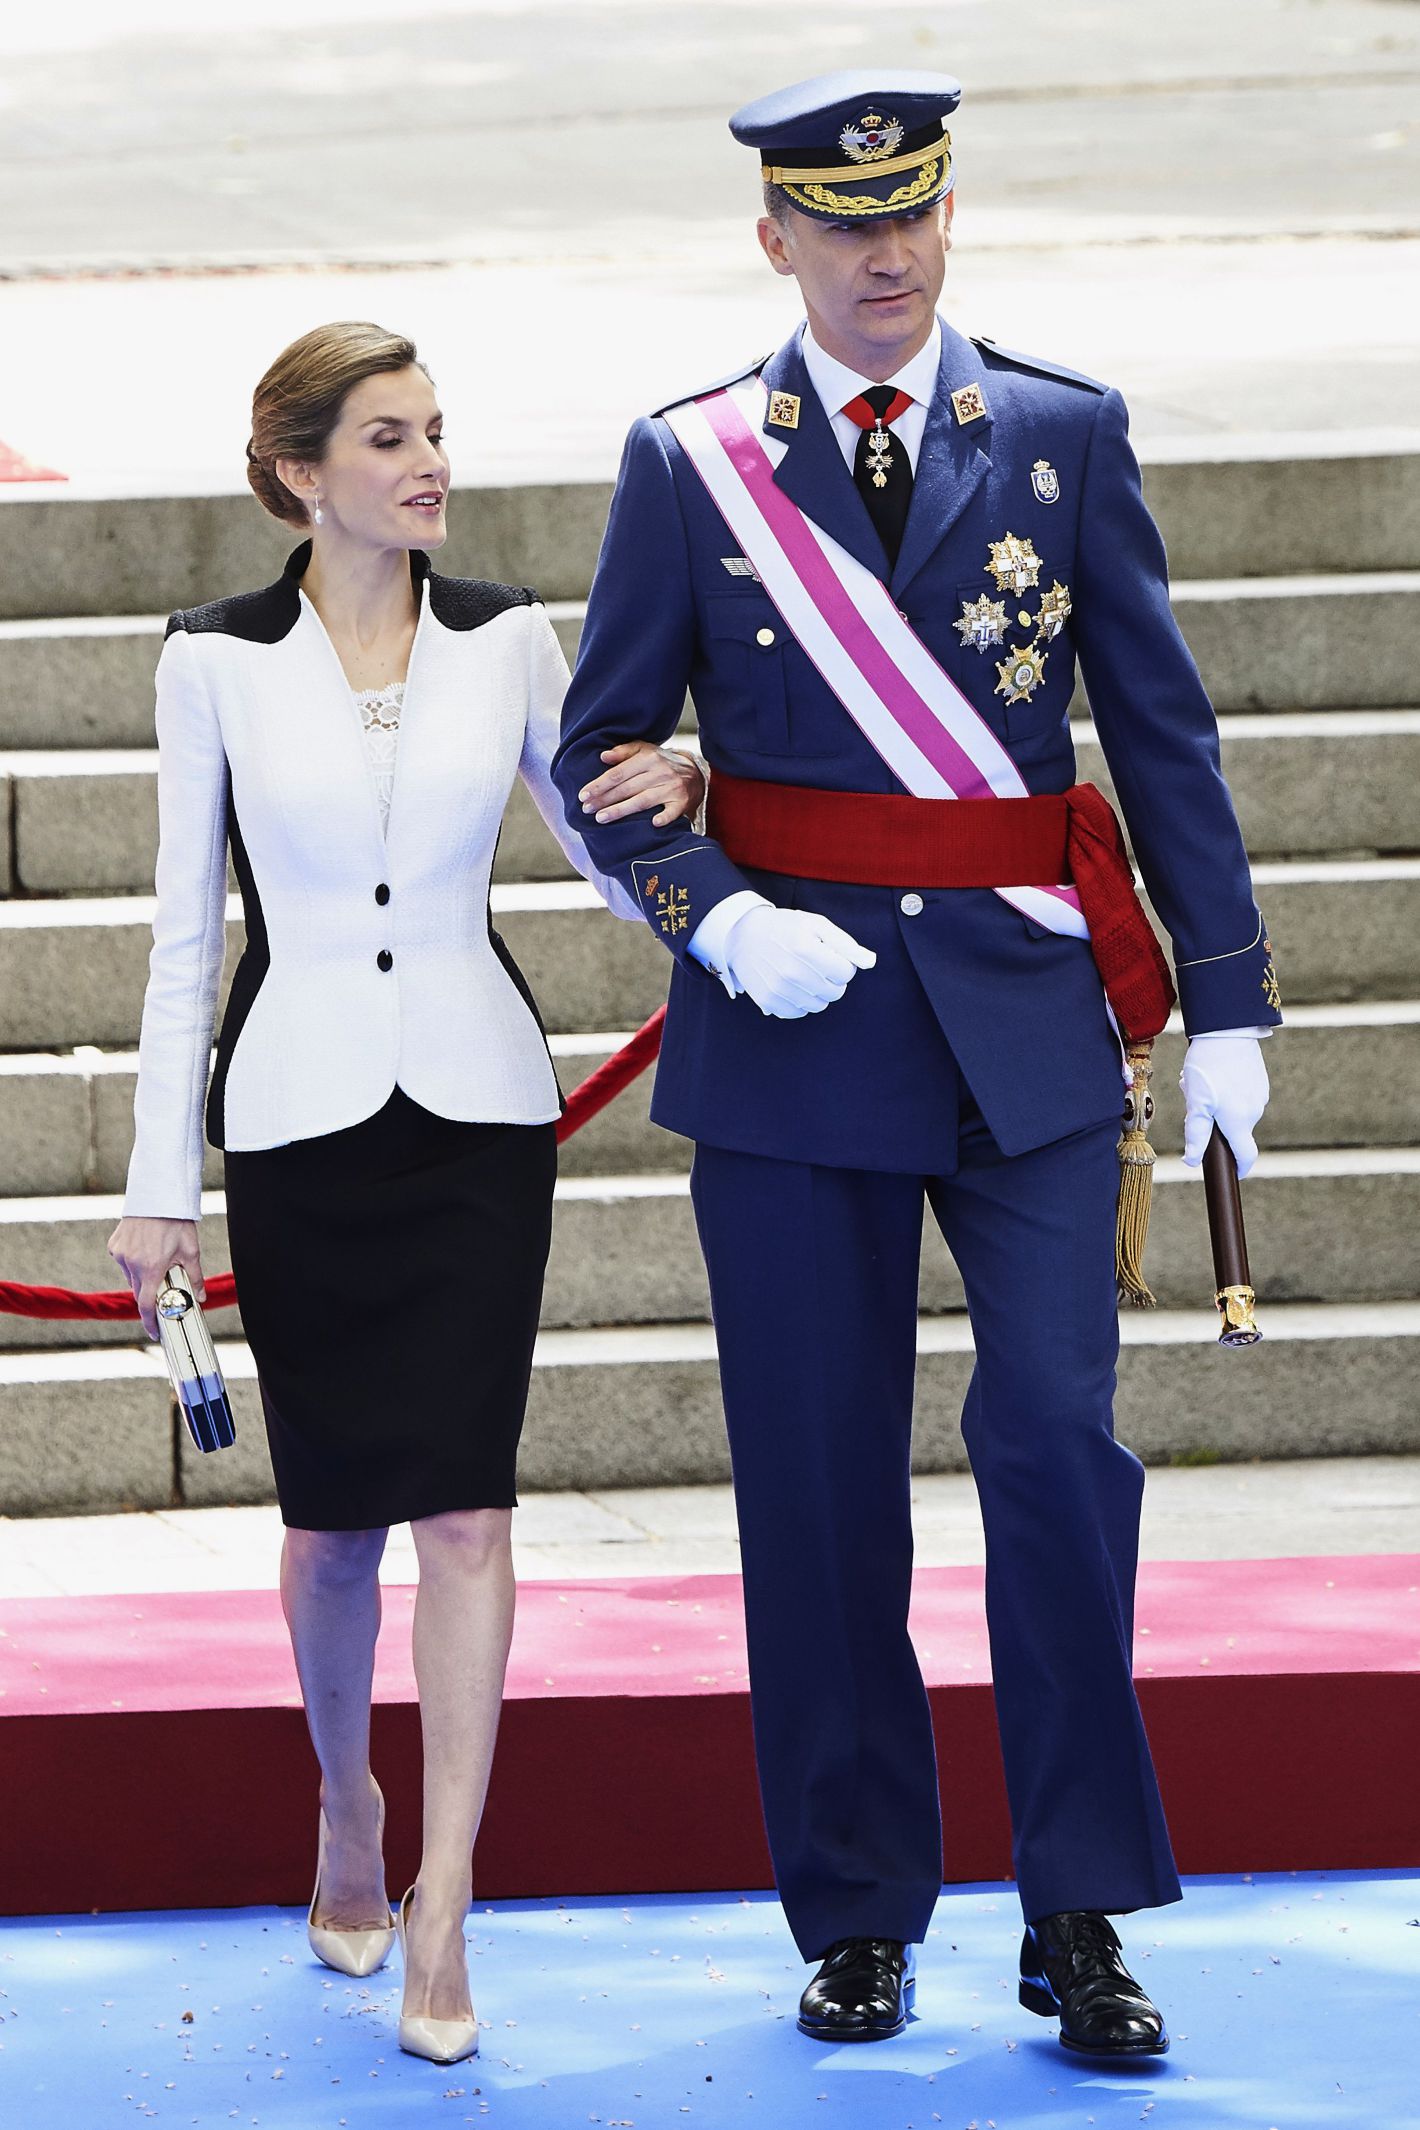 Mandatory Credit: Photo by REX/Shutterstock (5696833i) King Felipe VI of Spain, Queen Letizia Spanish Armed Forces Day parade at Lealtad Square, Madrid, Spain - 28 May 2016